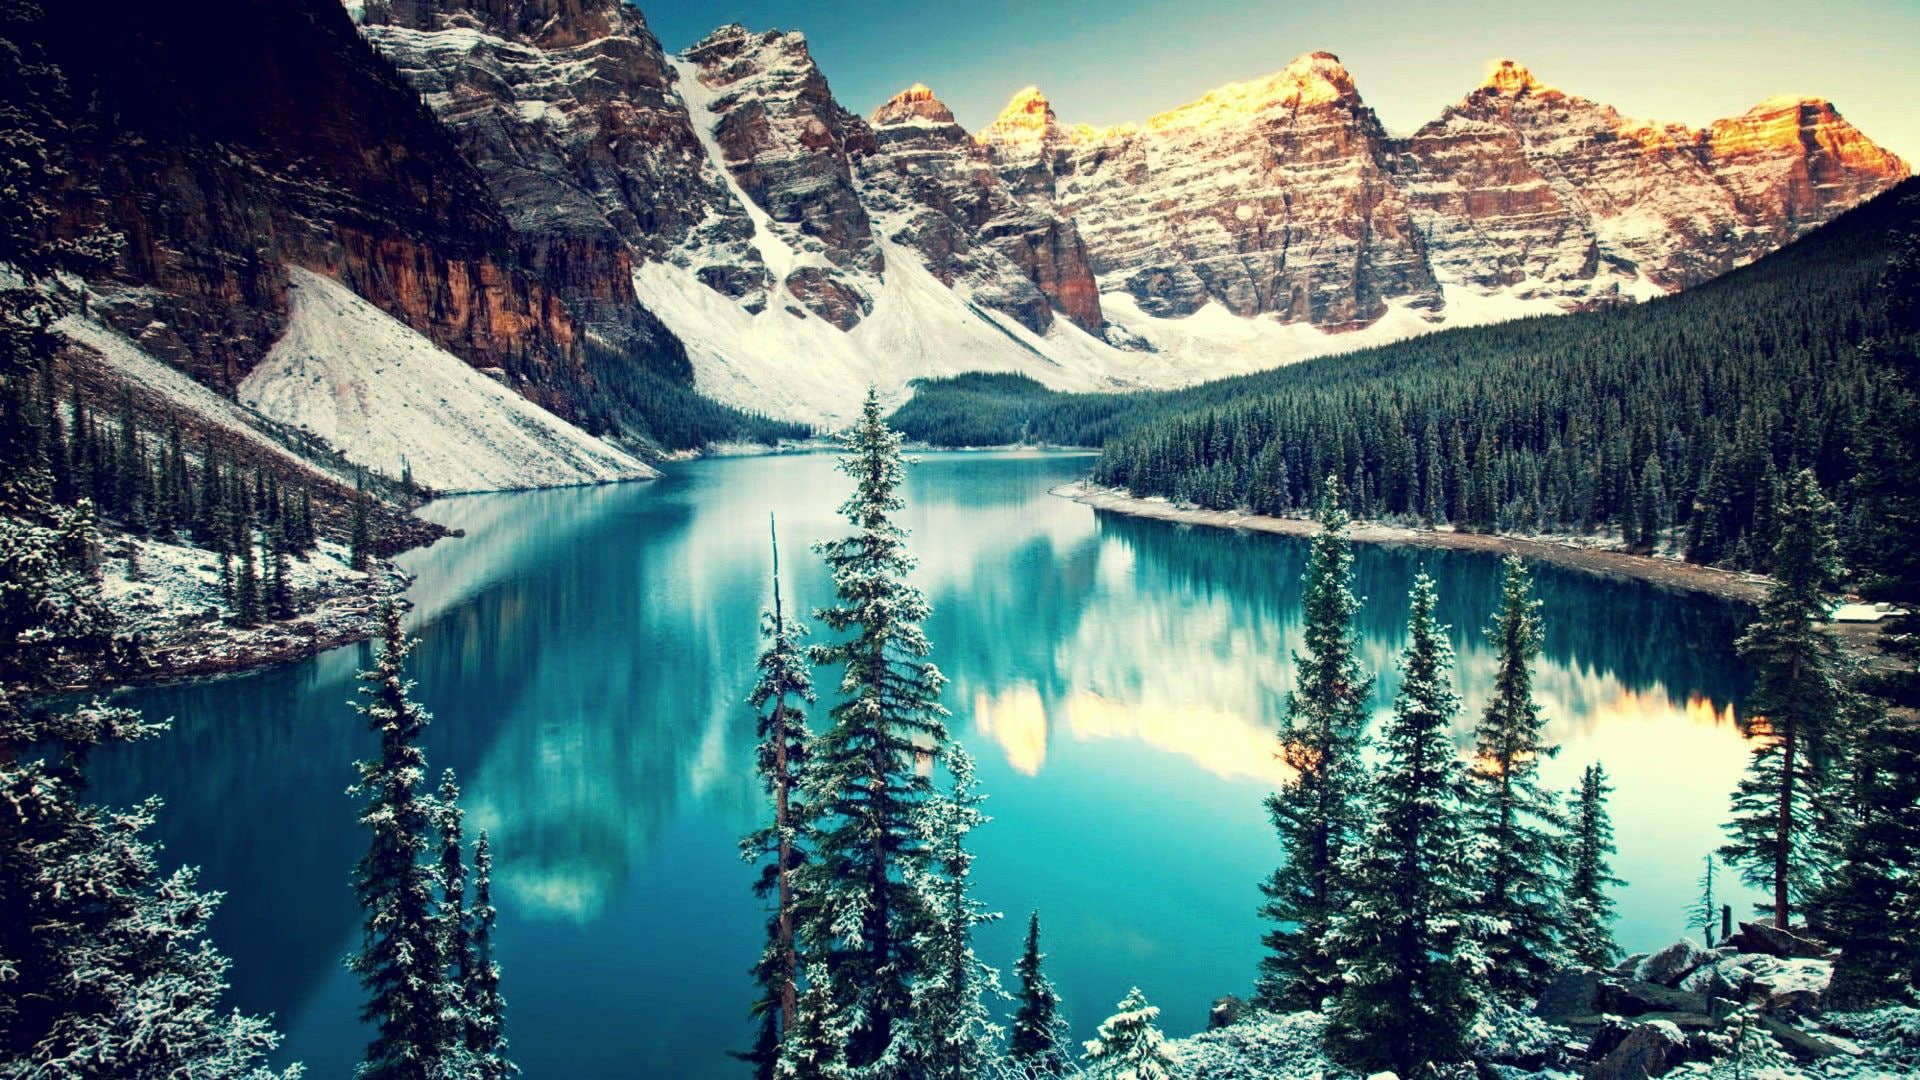 Winter in Canada Moraine Lake HD, lakes, mountains, nature, pine trees